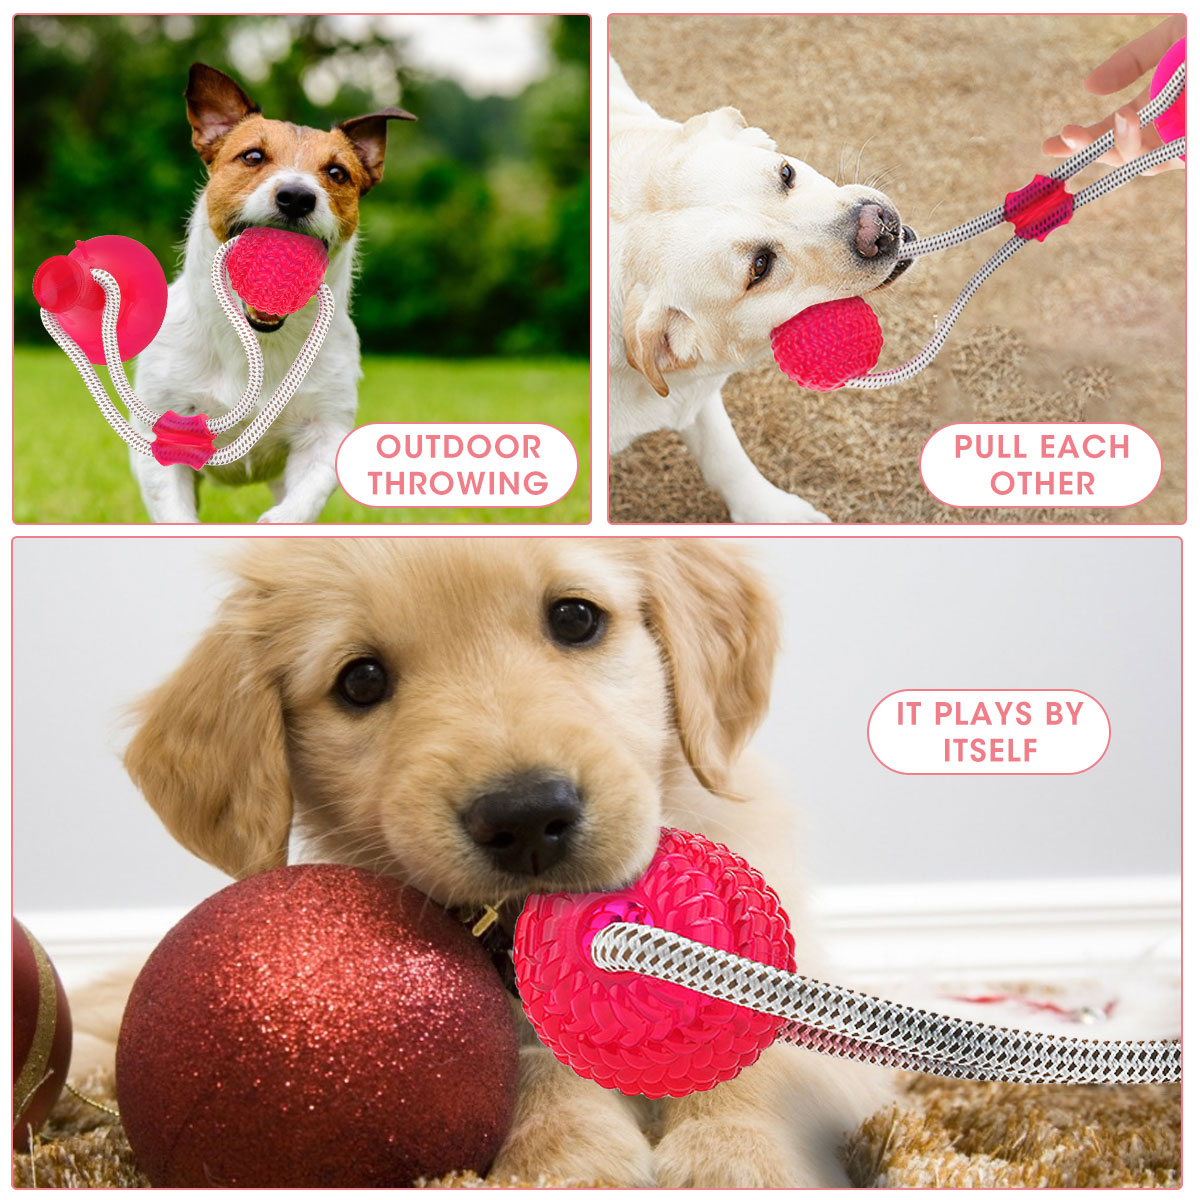 Pet-Molar-Bite-Toy-Suction-Cup-Rubber-Ball-Dog-Chew-Toys-Interactive-Puppy-Molar-Training-Rope-Tug-R-1900175-5